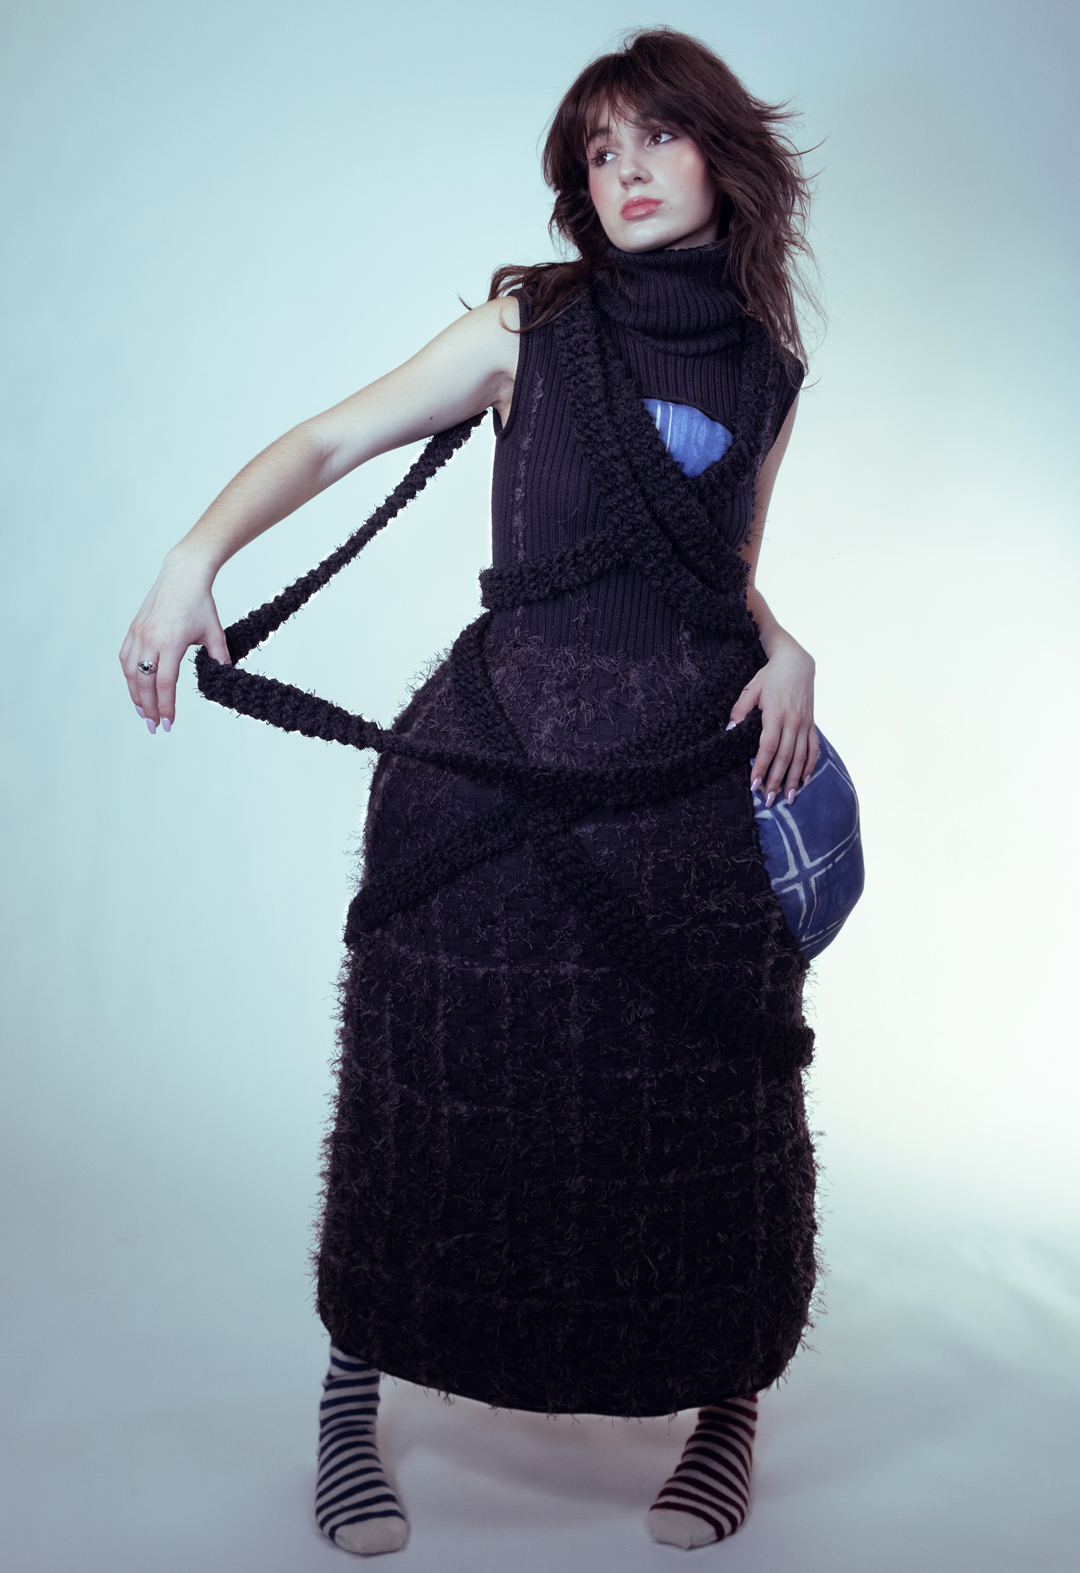 The model stands holding a long tassel out. She is wearing a black wide-hipped dress with textured embroidery on the bottom, along with blue-printed stuffed bulges on the chest and on the wearer's left hip. 